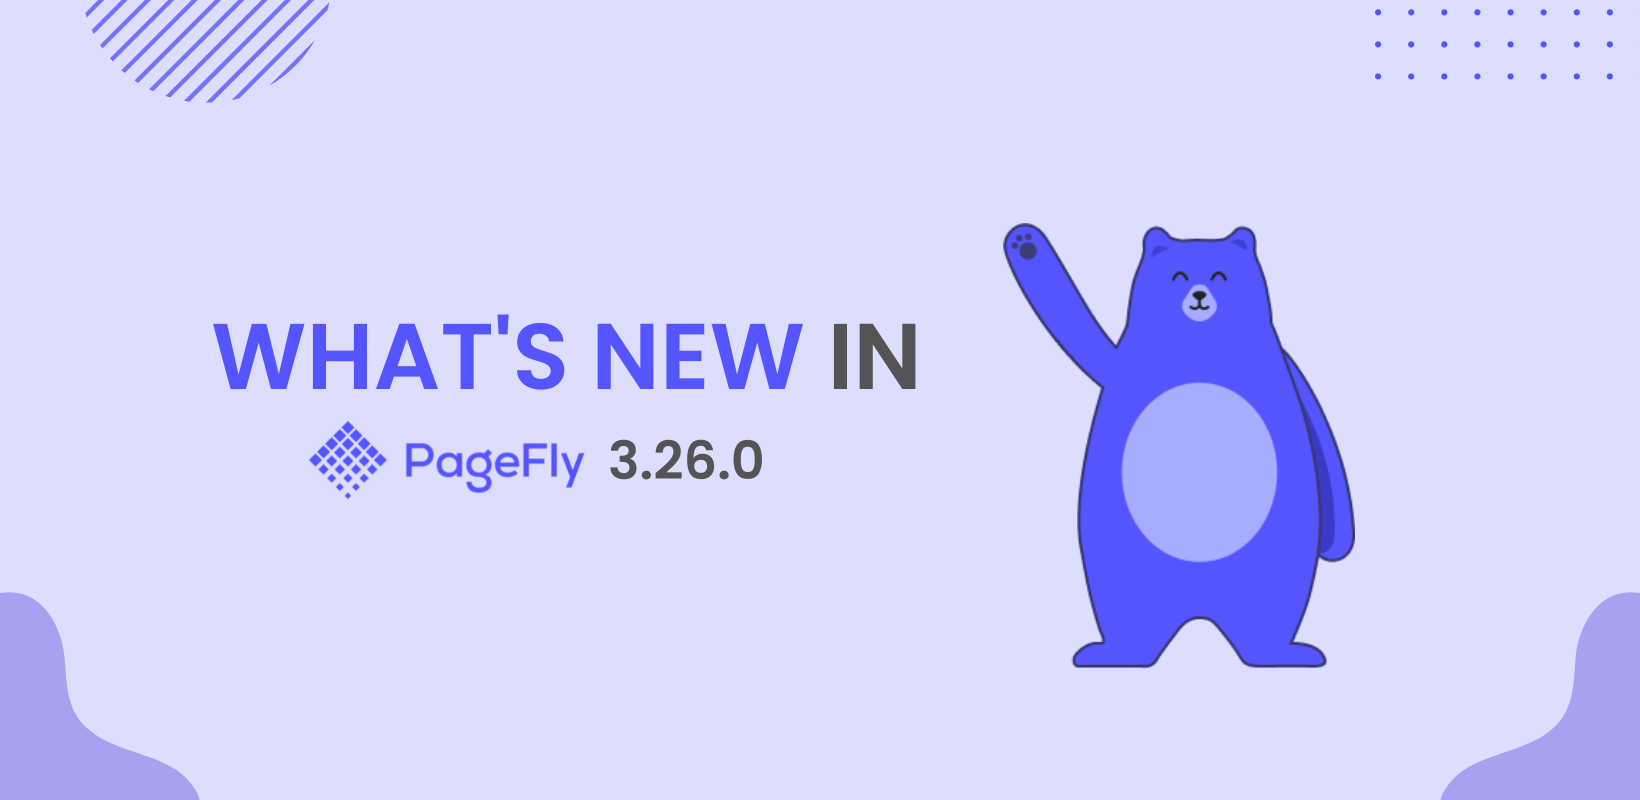 PageFly 3.26.0 Releases: Element Variants Improvement, New Option for Slideshow & More Third-Party Apps Integrations